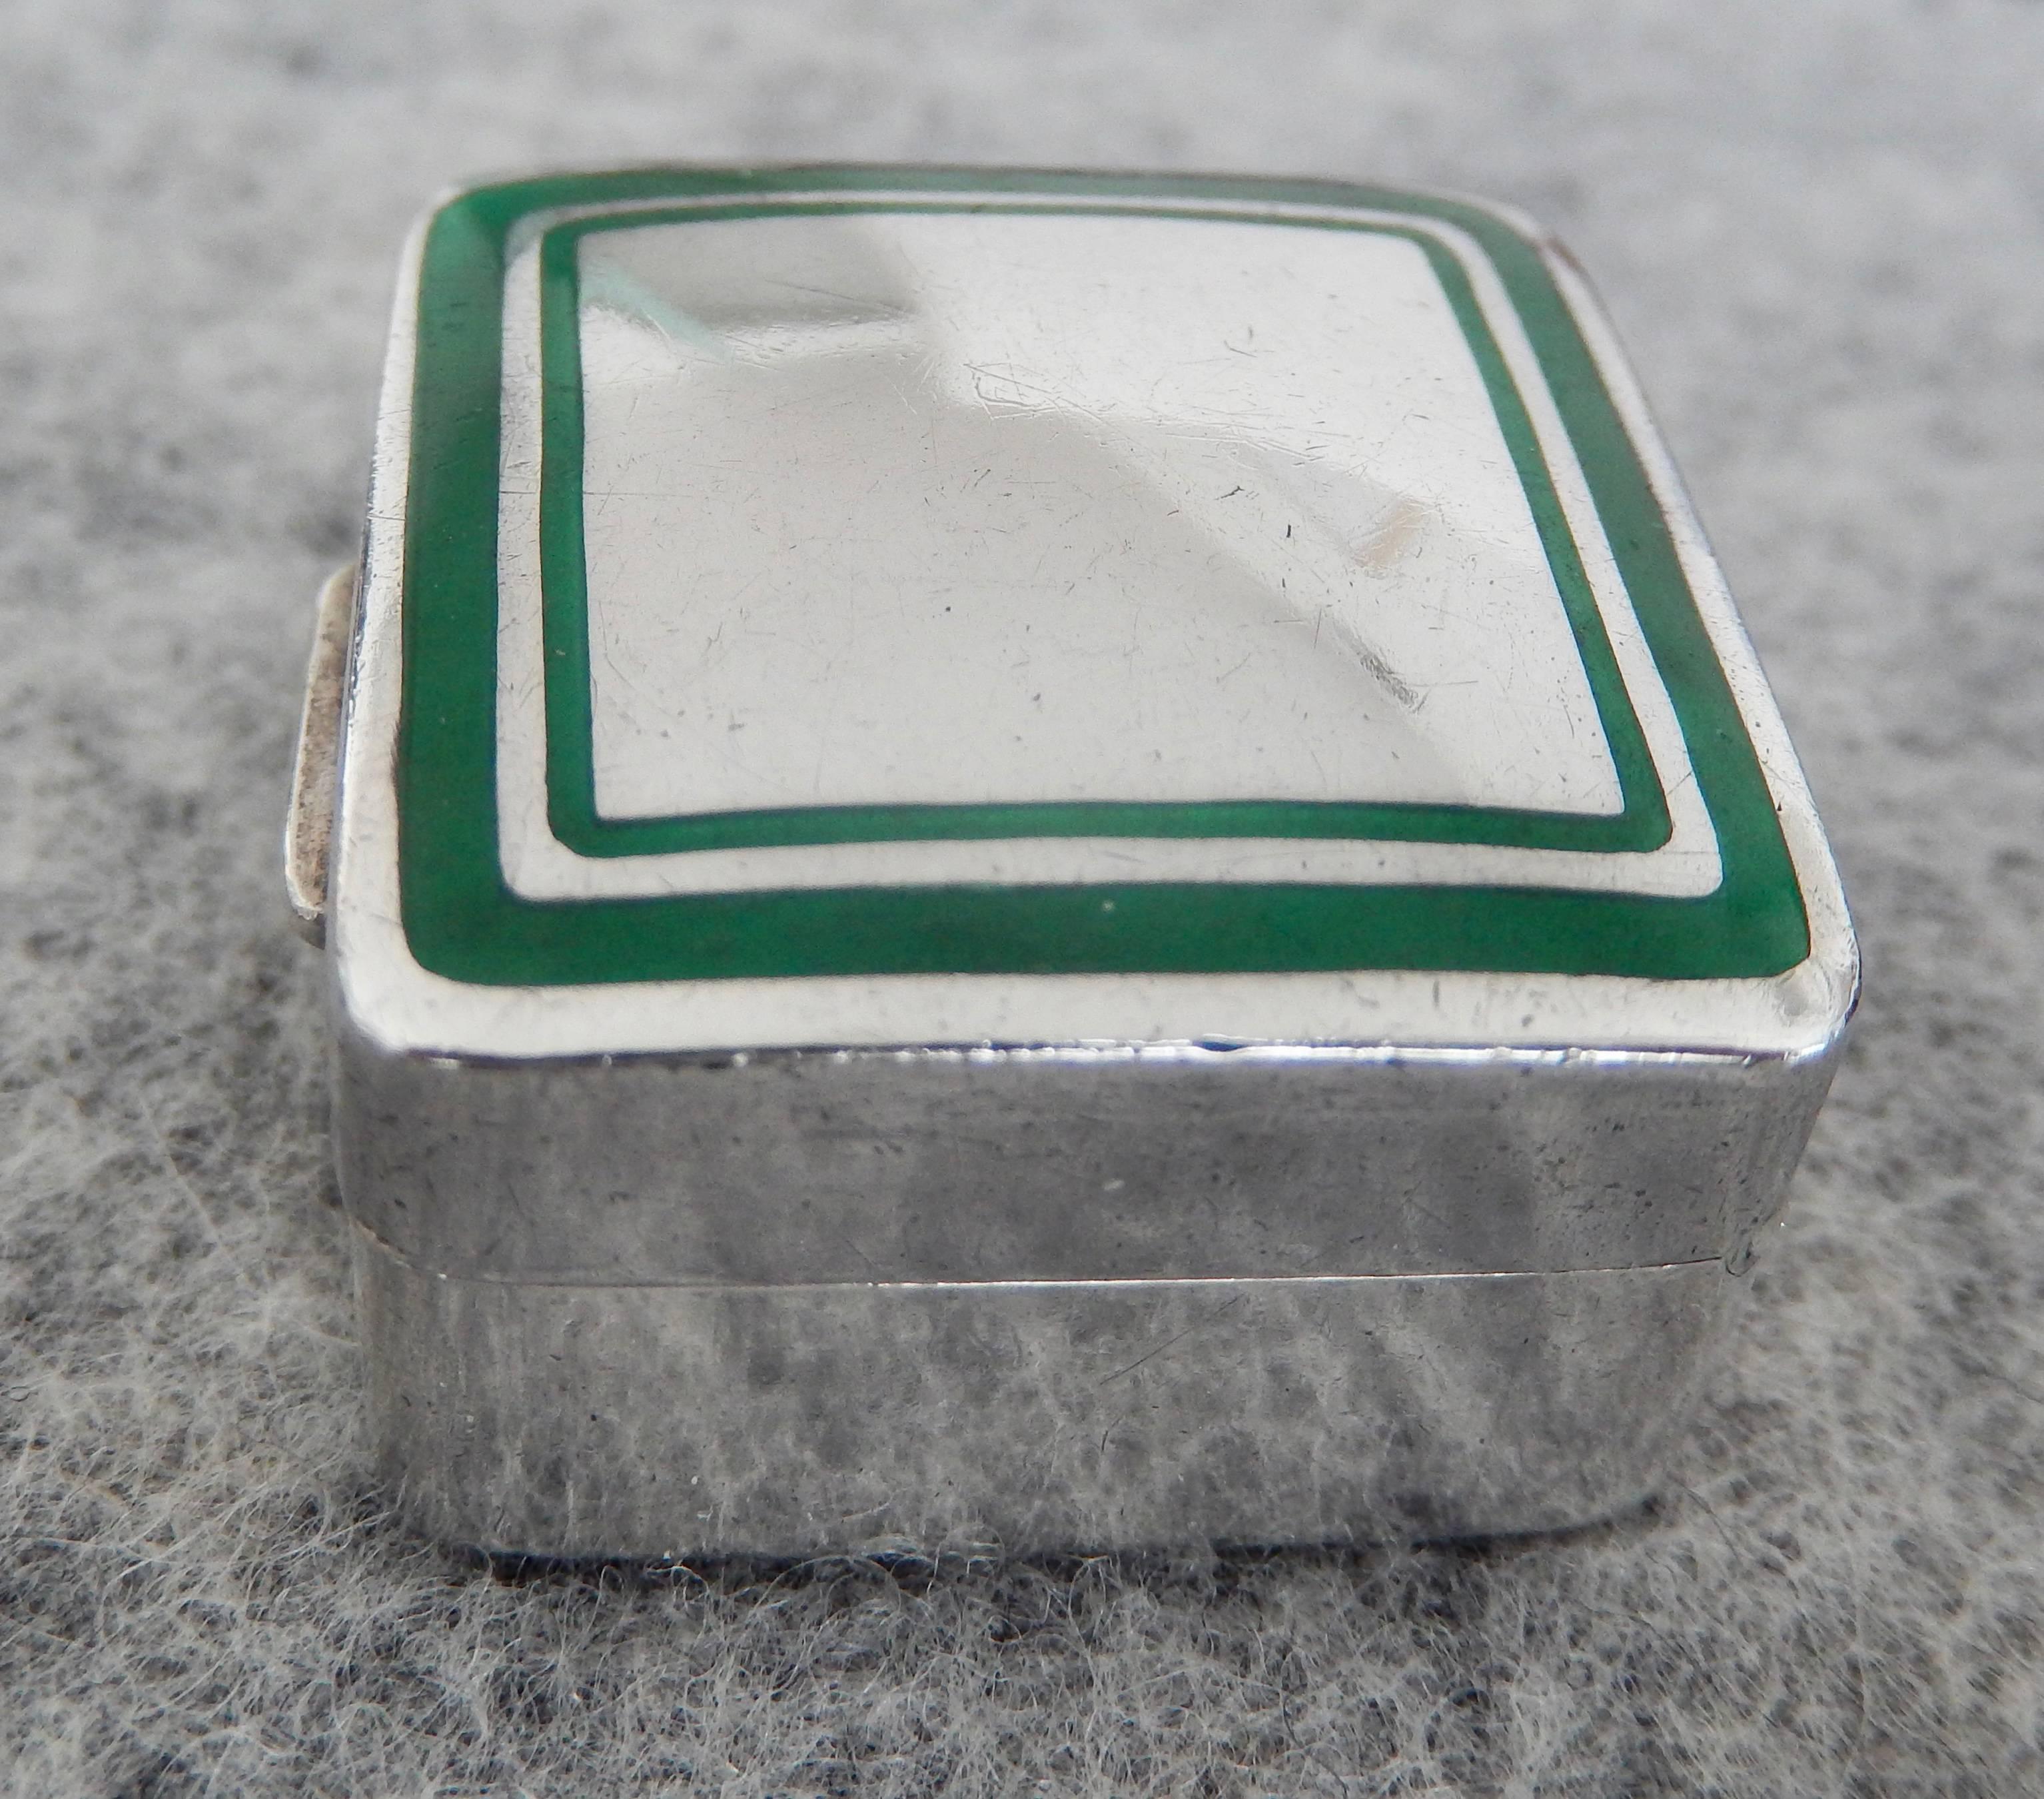 A petite 1970s sterling and green enamel pillbox by Cartier. The geometric design of a square within a square is a very attractive example of modern design from the period. C'est tres chic.
Marked 